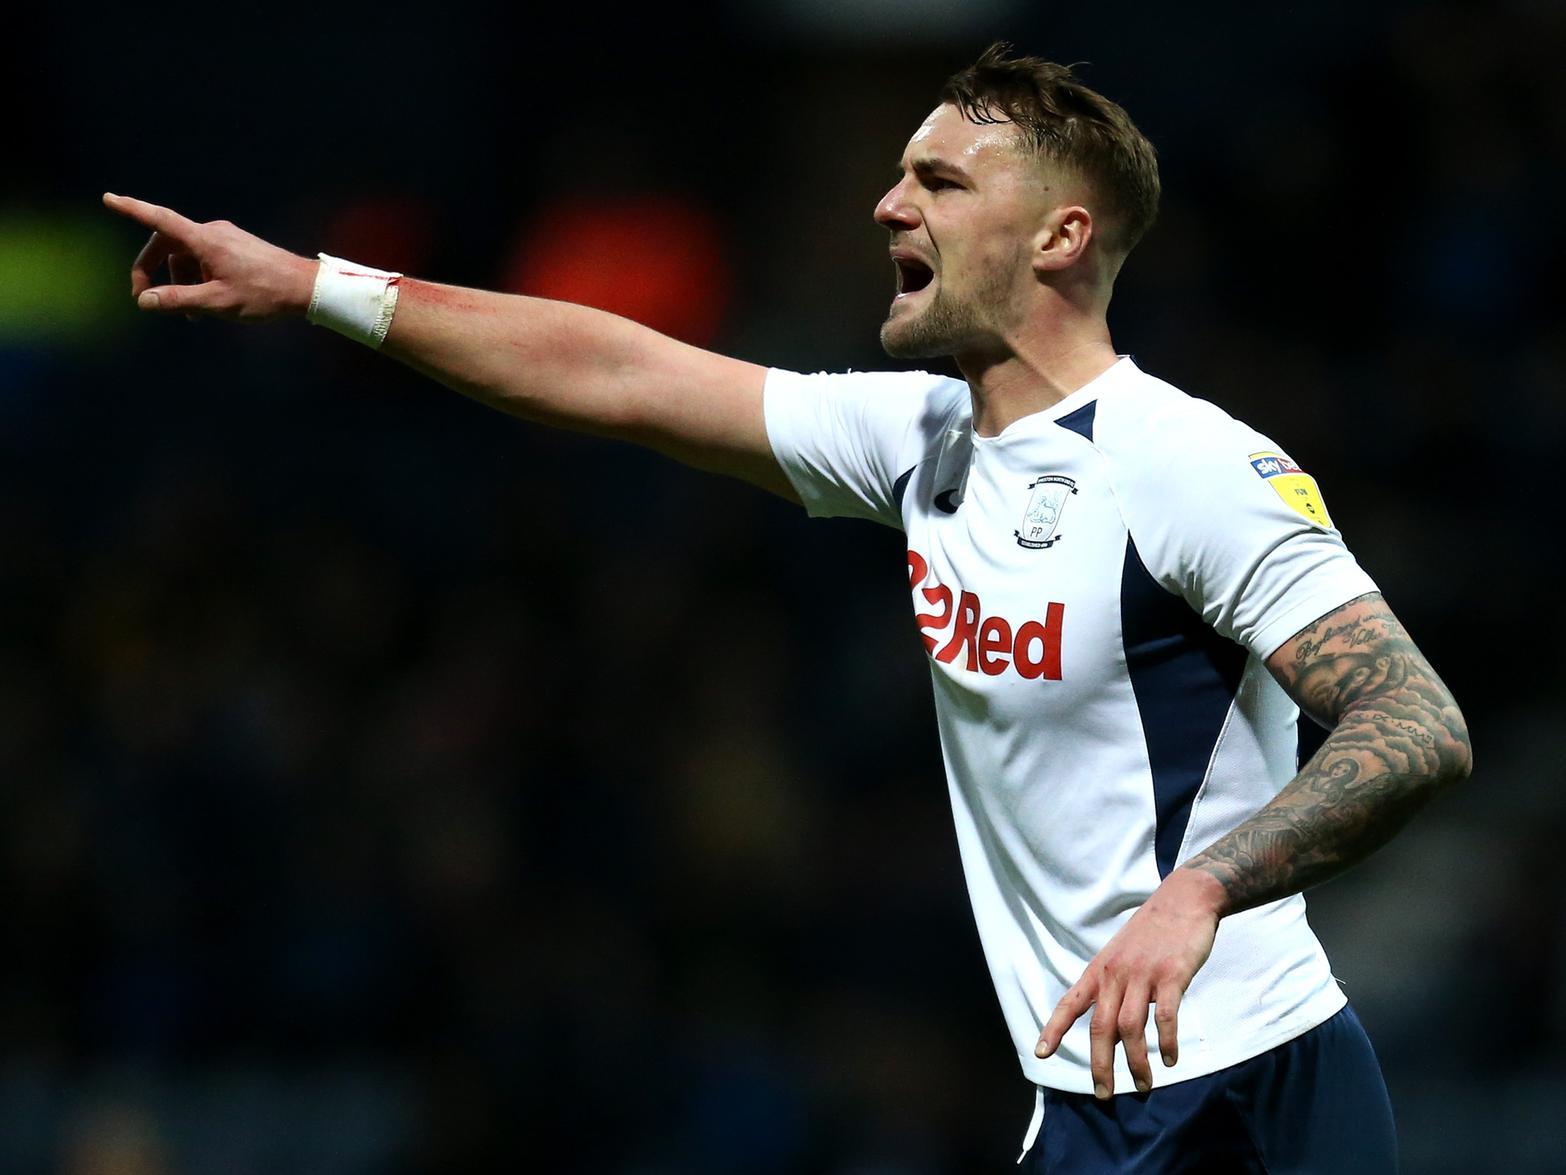 Preston North End defender Patrick Bauer has revealed he left Charlton despite their promotion last season as he was eager to make the next step in his career, and has branded the move"an upgrade" (South London Press)